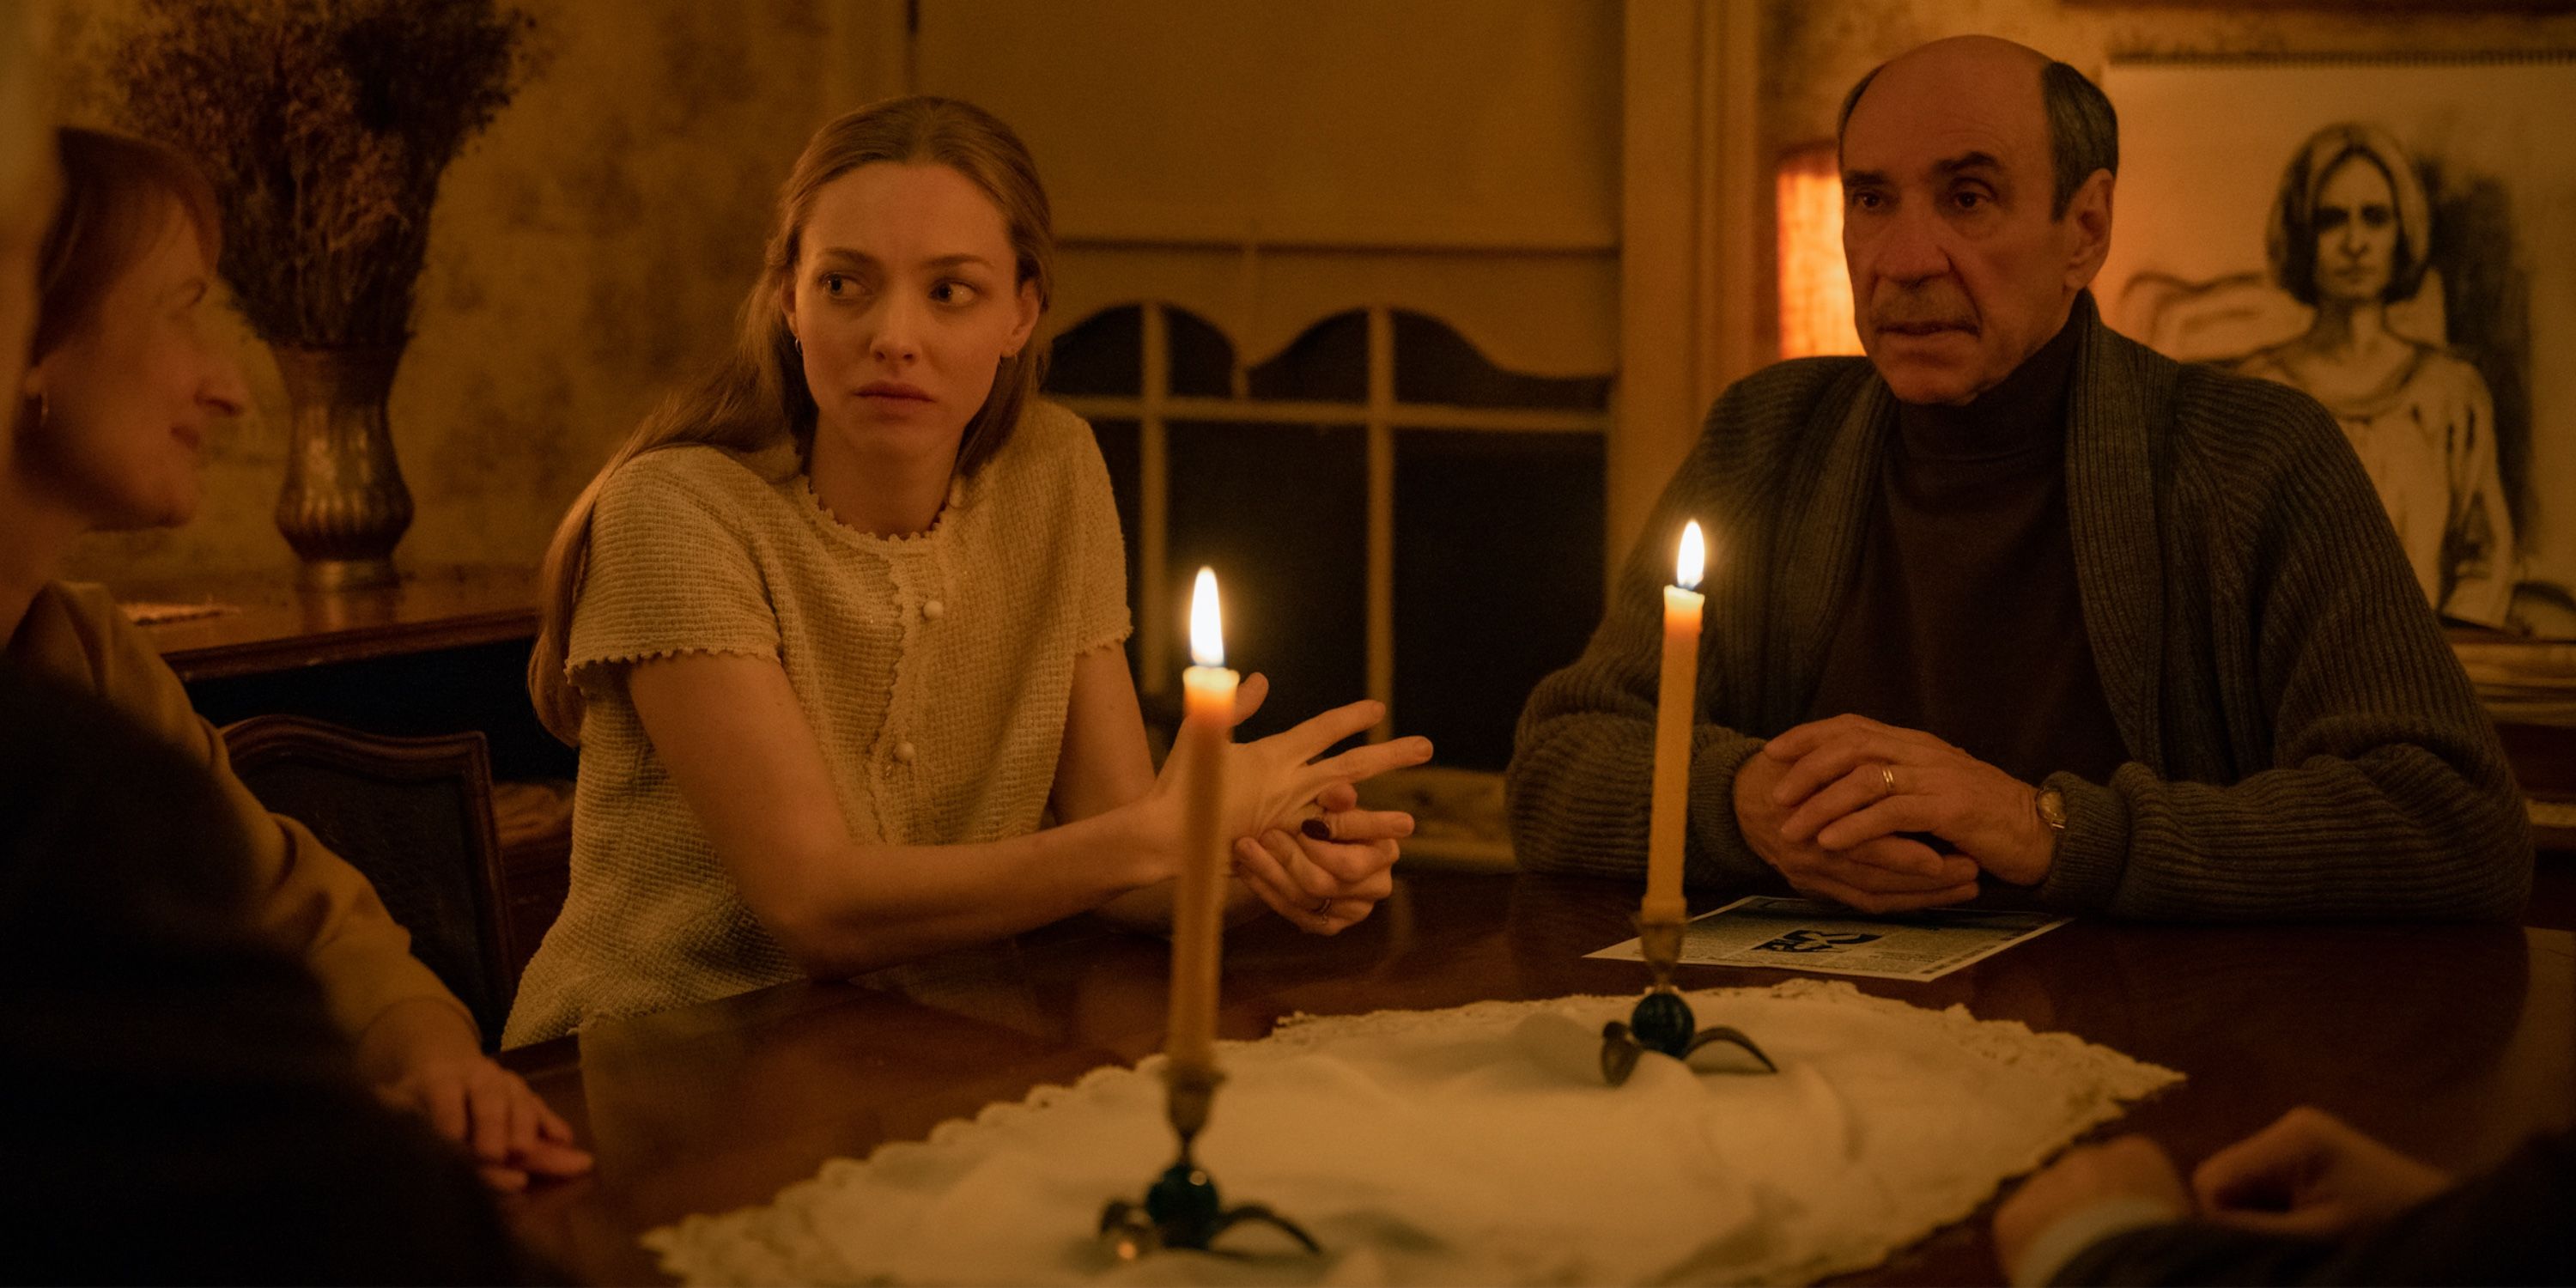 Amanda Seyfried as Catherine Claire and F. Murray Abraham as Floyd DeBeers in Things Heard &amp; Seen on Netflix